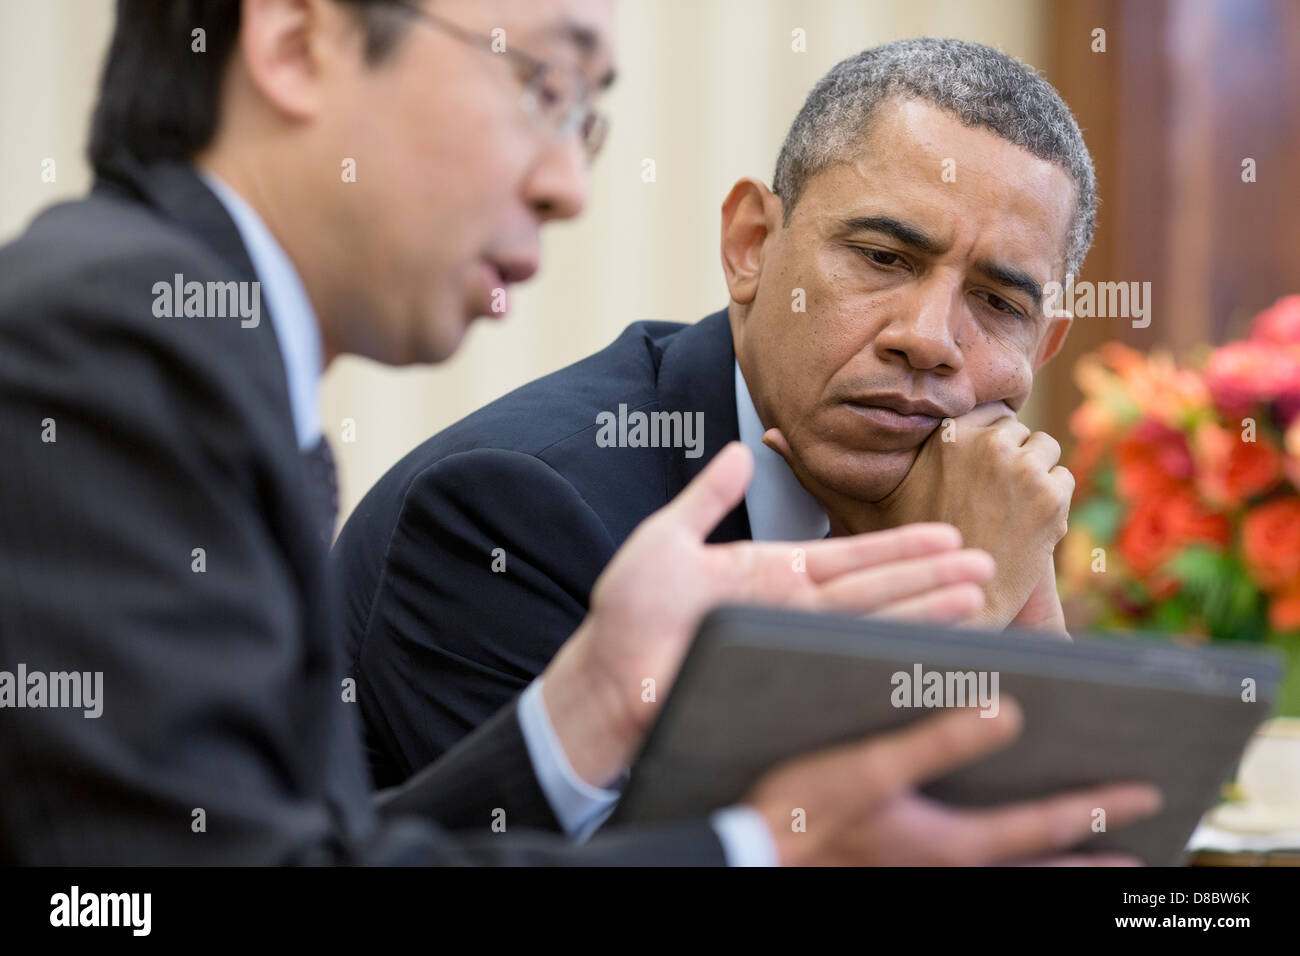 US President Barack Obama watches as Todd Park, Assistant to the President and Chief Technology Officer, shows him information on a tablet during a meeting in the Oval Office April 15, 2013 in Washington, DC. Stock Photo